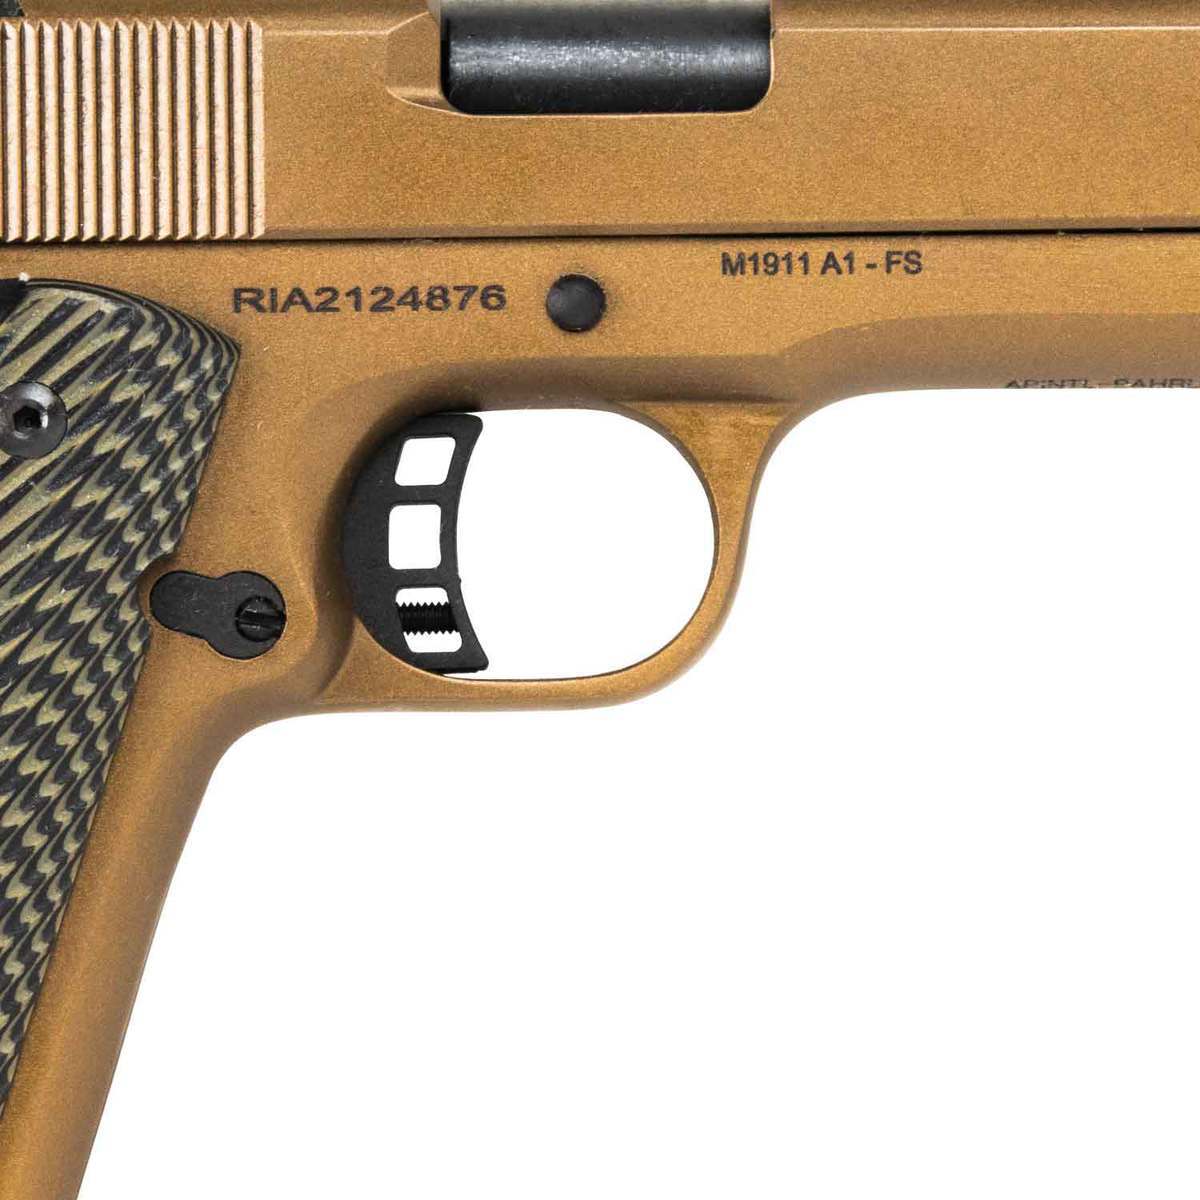 Rock Island Armory M1911 A1 Fs Tactical 45 Auto Acp 5in Burnt Bronzegreen Pistol 81 Rounds 2493